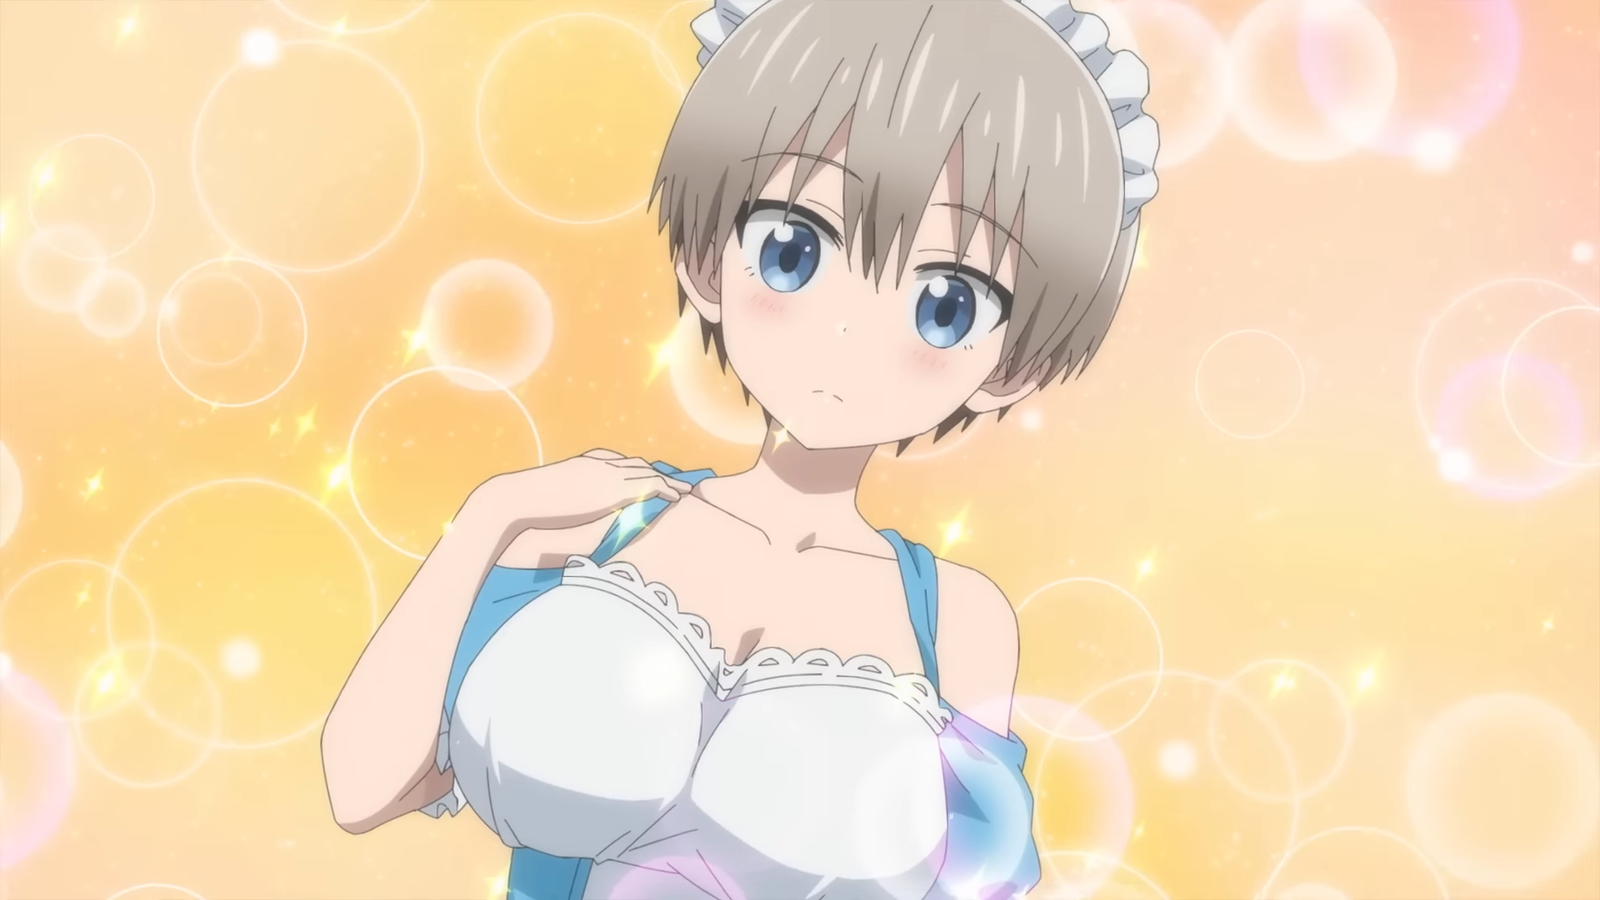 Where to Start Reading Uzaki-chan Wants to Hang Out After the Anime